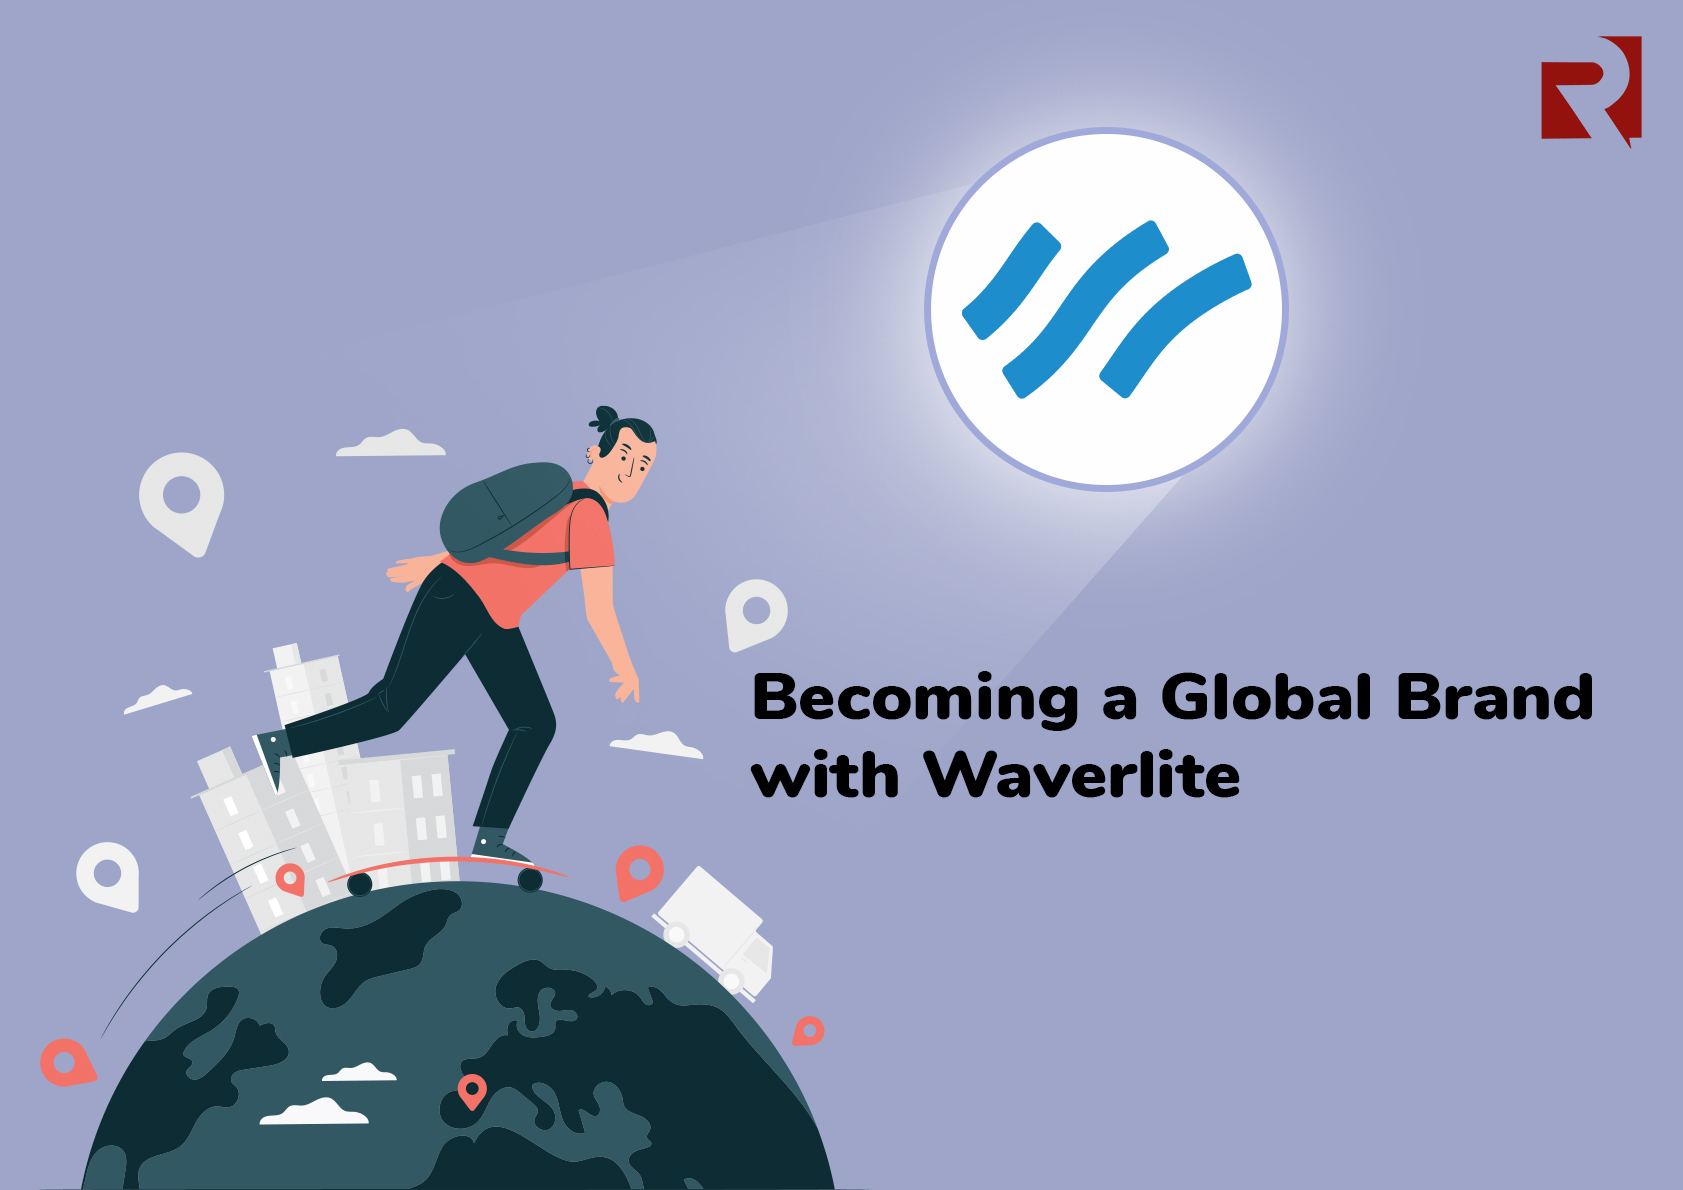 Becoming a Global Brand with Waverlite